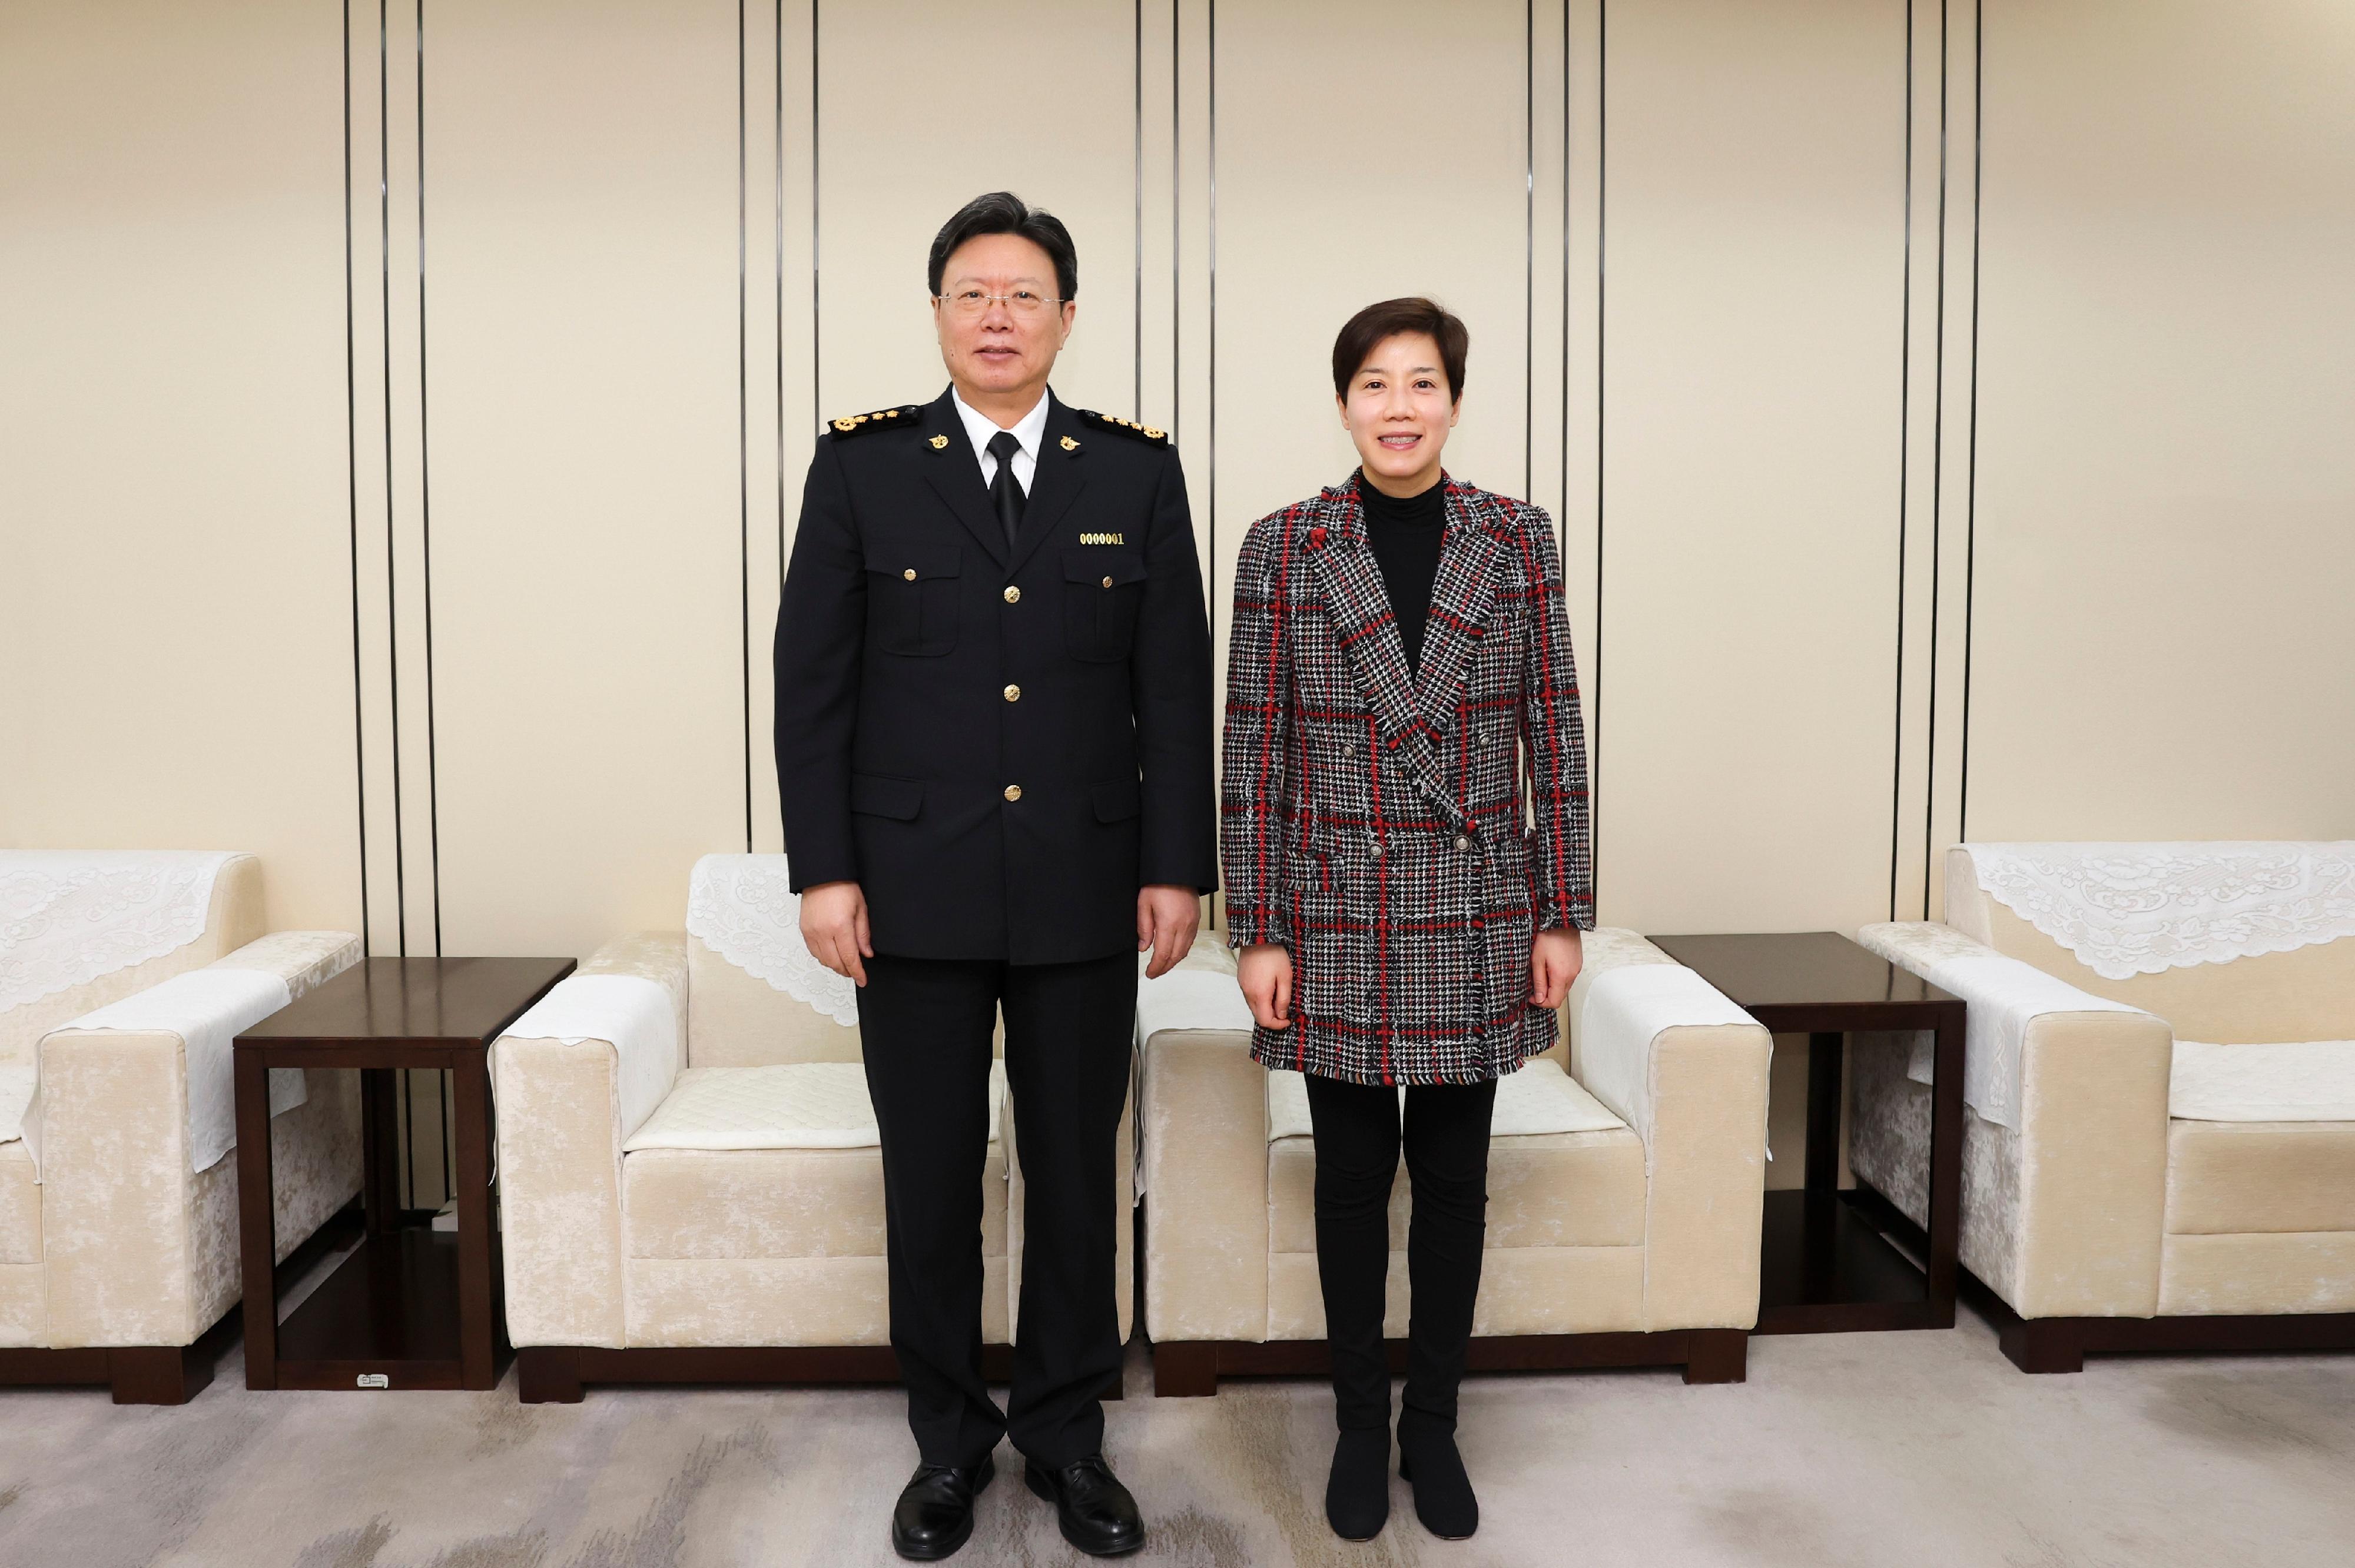 The Commissioner of Customs and Excise, Ms Louise Ho (right), today (March 28) visited the General Administration of Customs of the People's Republic of China (GACC) in Beijing and met with the Minister of the GACC, Mr Yu Jianhua (left).